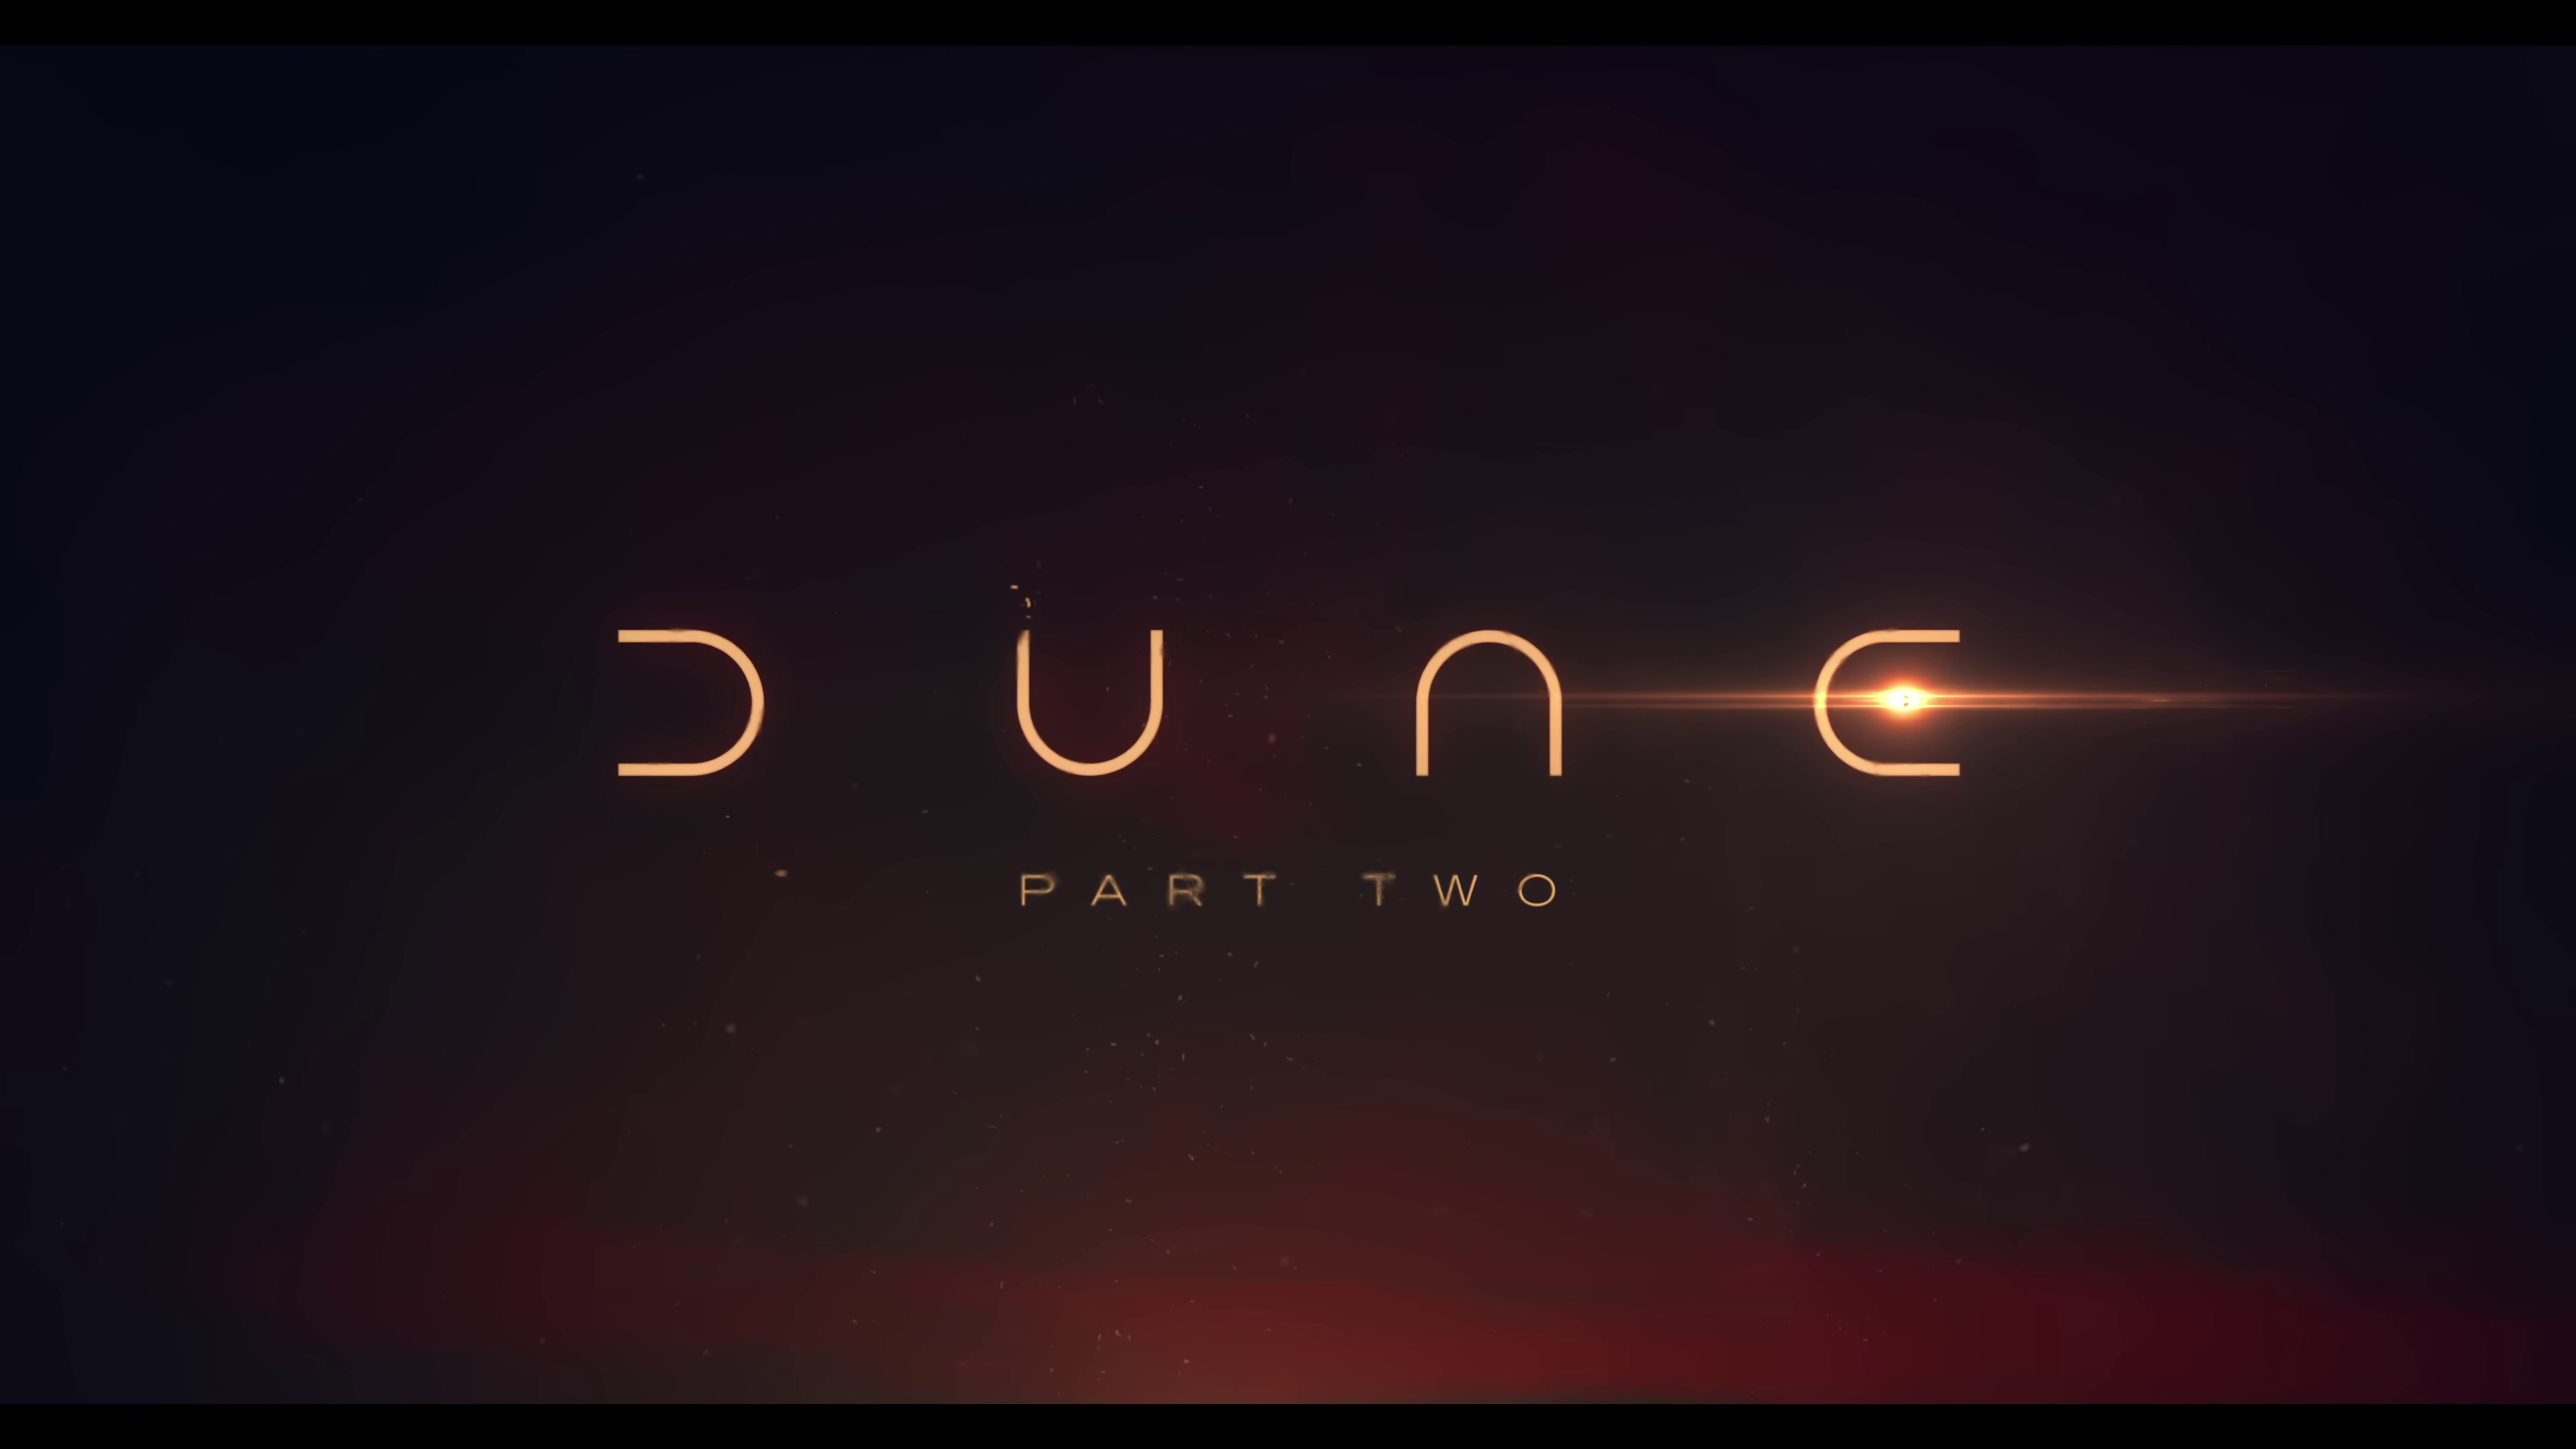 Dune: Part Two HD wallpaper Resolution 3840x2160 | Best Download this awesome wallpaper - Cool Wallpaper HD - CoolWallpaper-HD.com